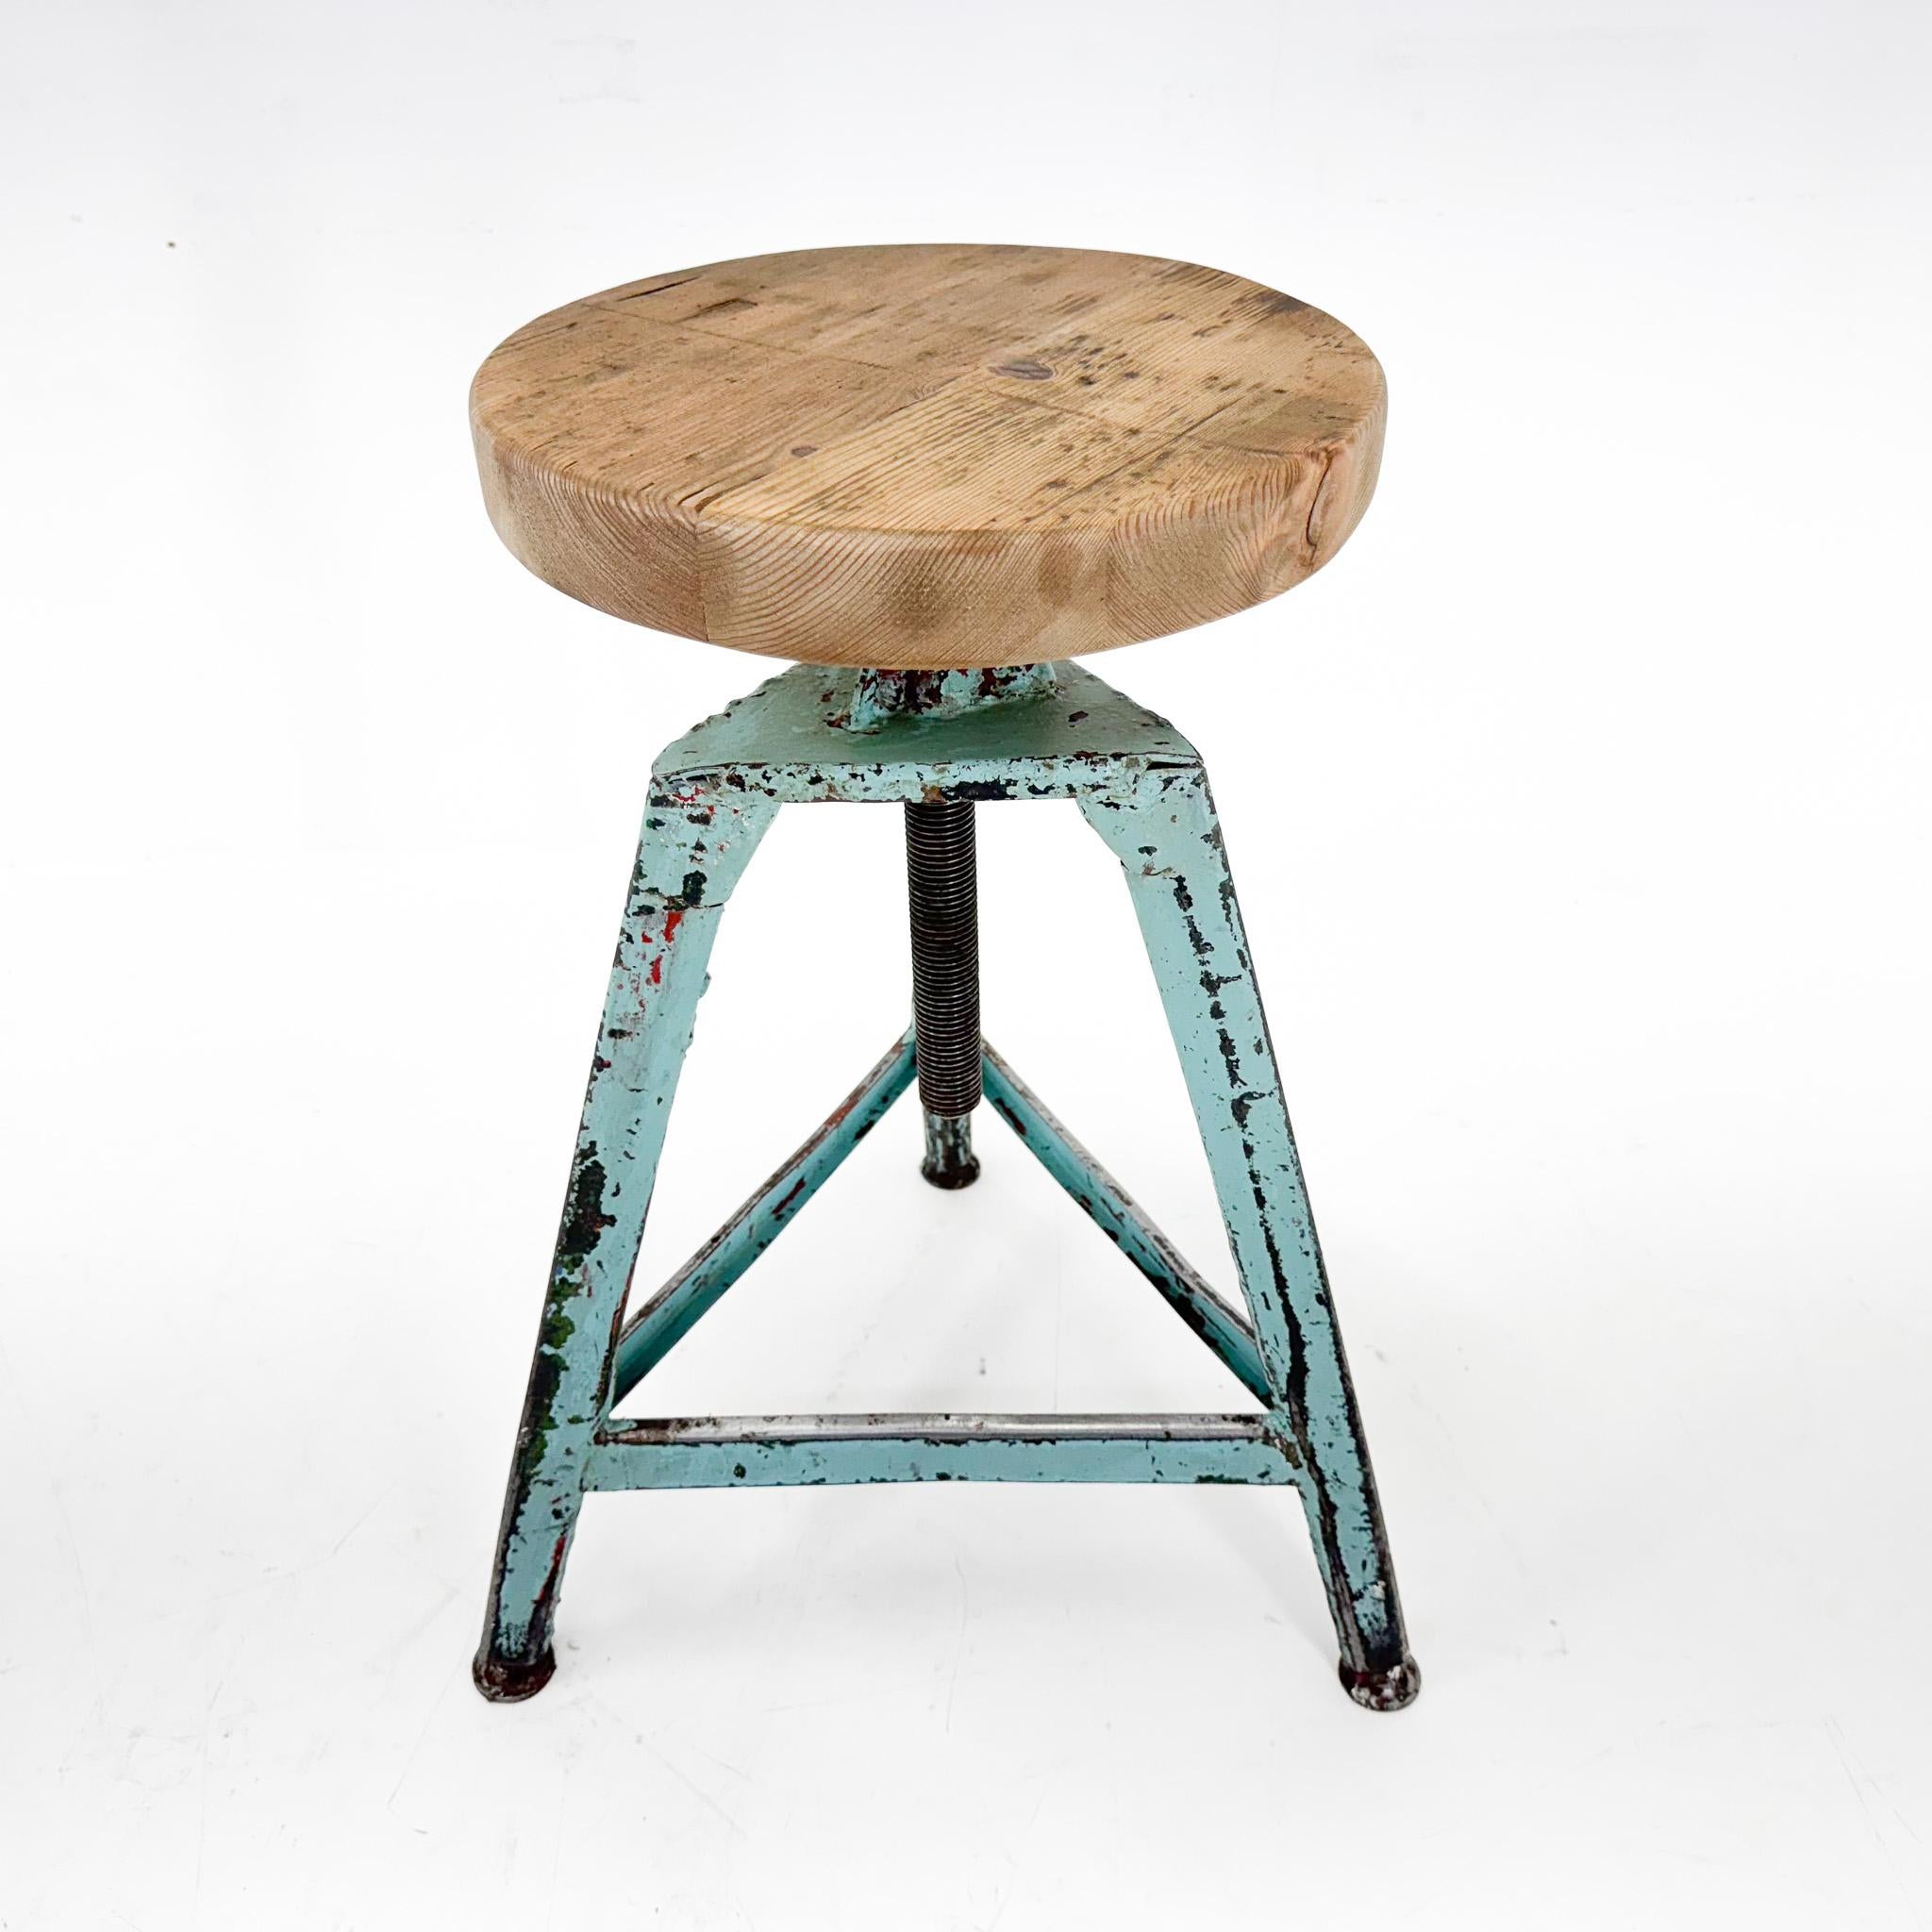 Vintage industrial tripod stool, made of steel and wood. Saved from a factory in former Czechoslovakia. The diameter of the seat is 32 cm. The widest point at the bottom of the legs is 46 cm. 